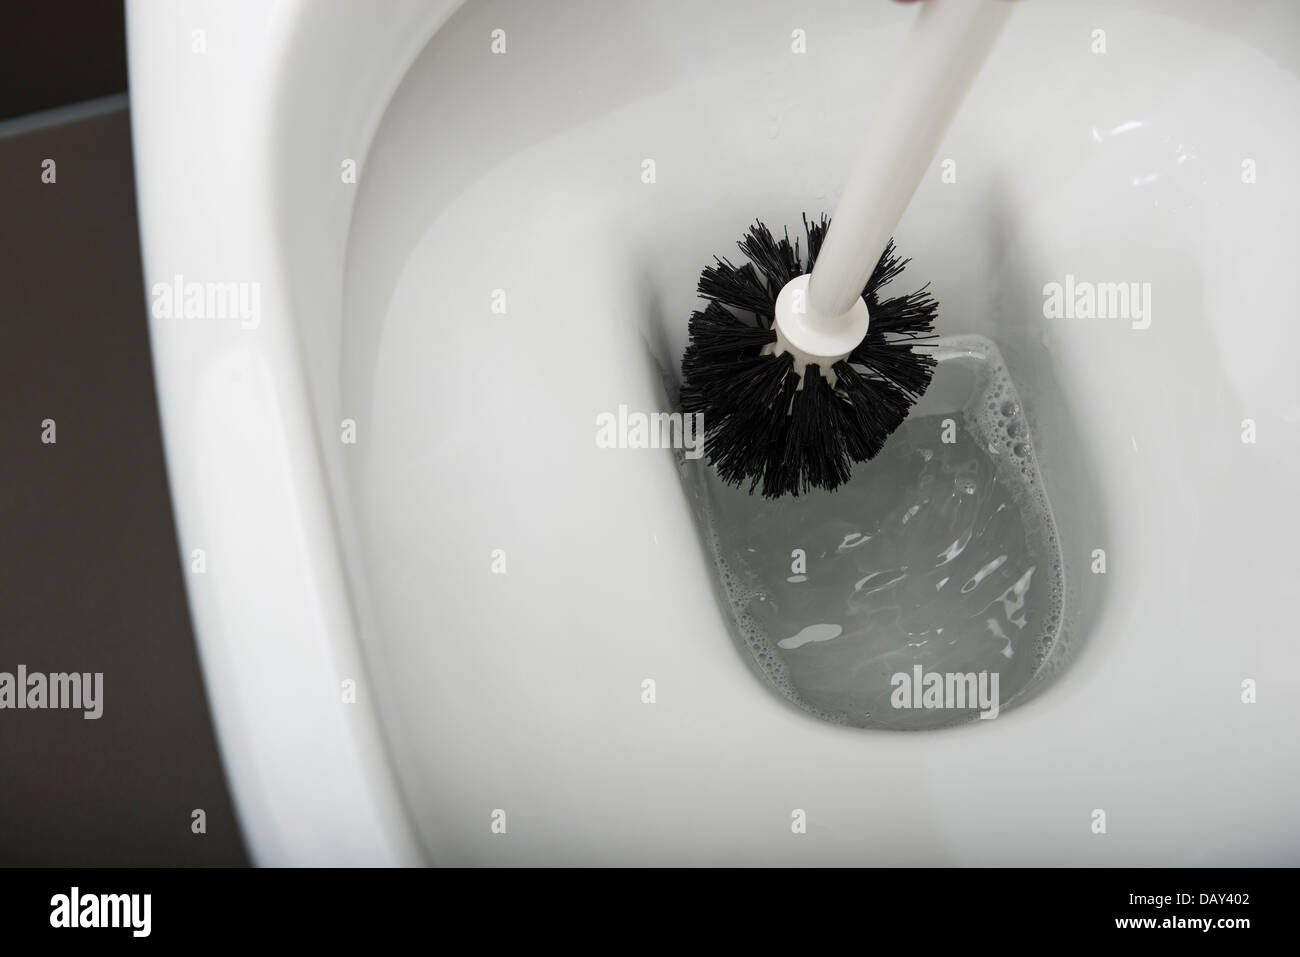 Toilet Brush in a modern white Toilet, Cleaning the Toilet. Stock Photo